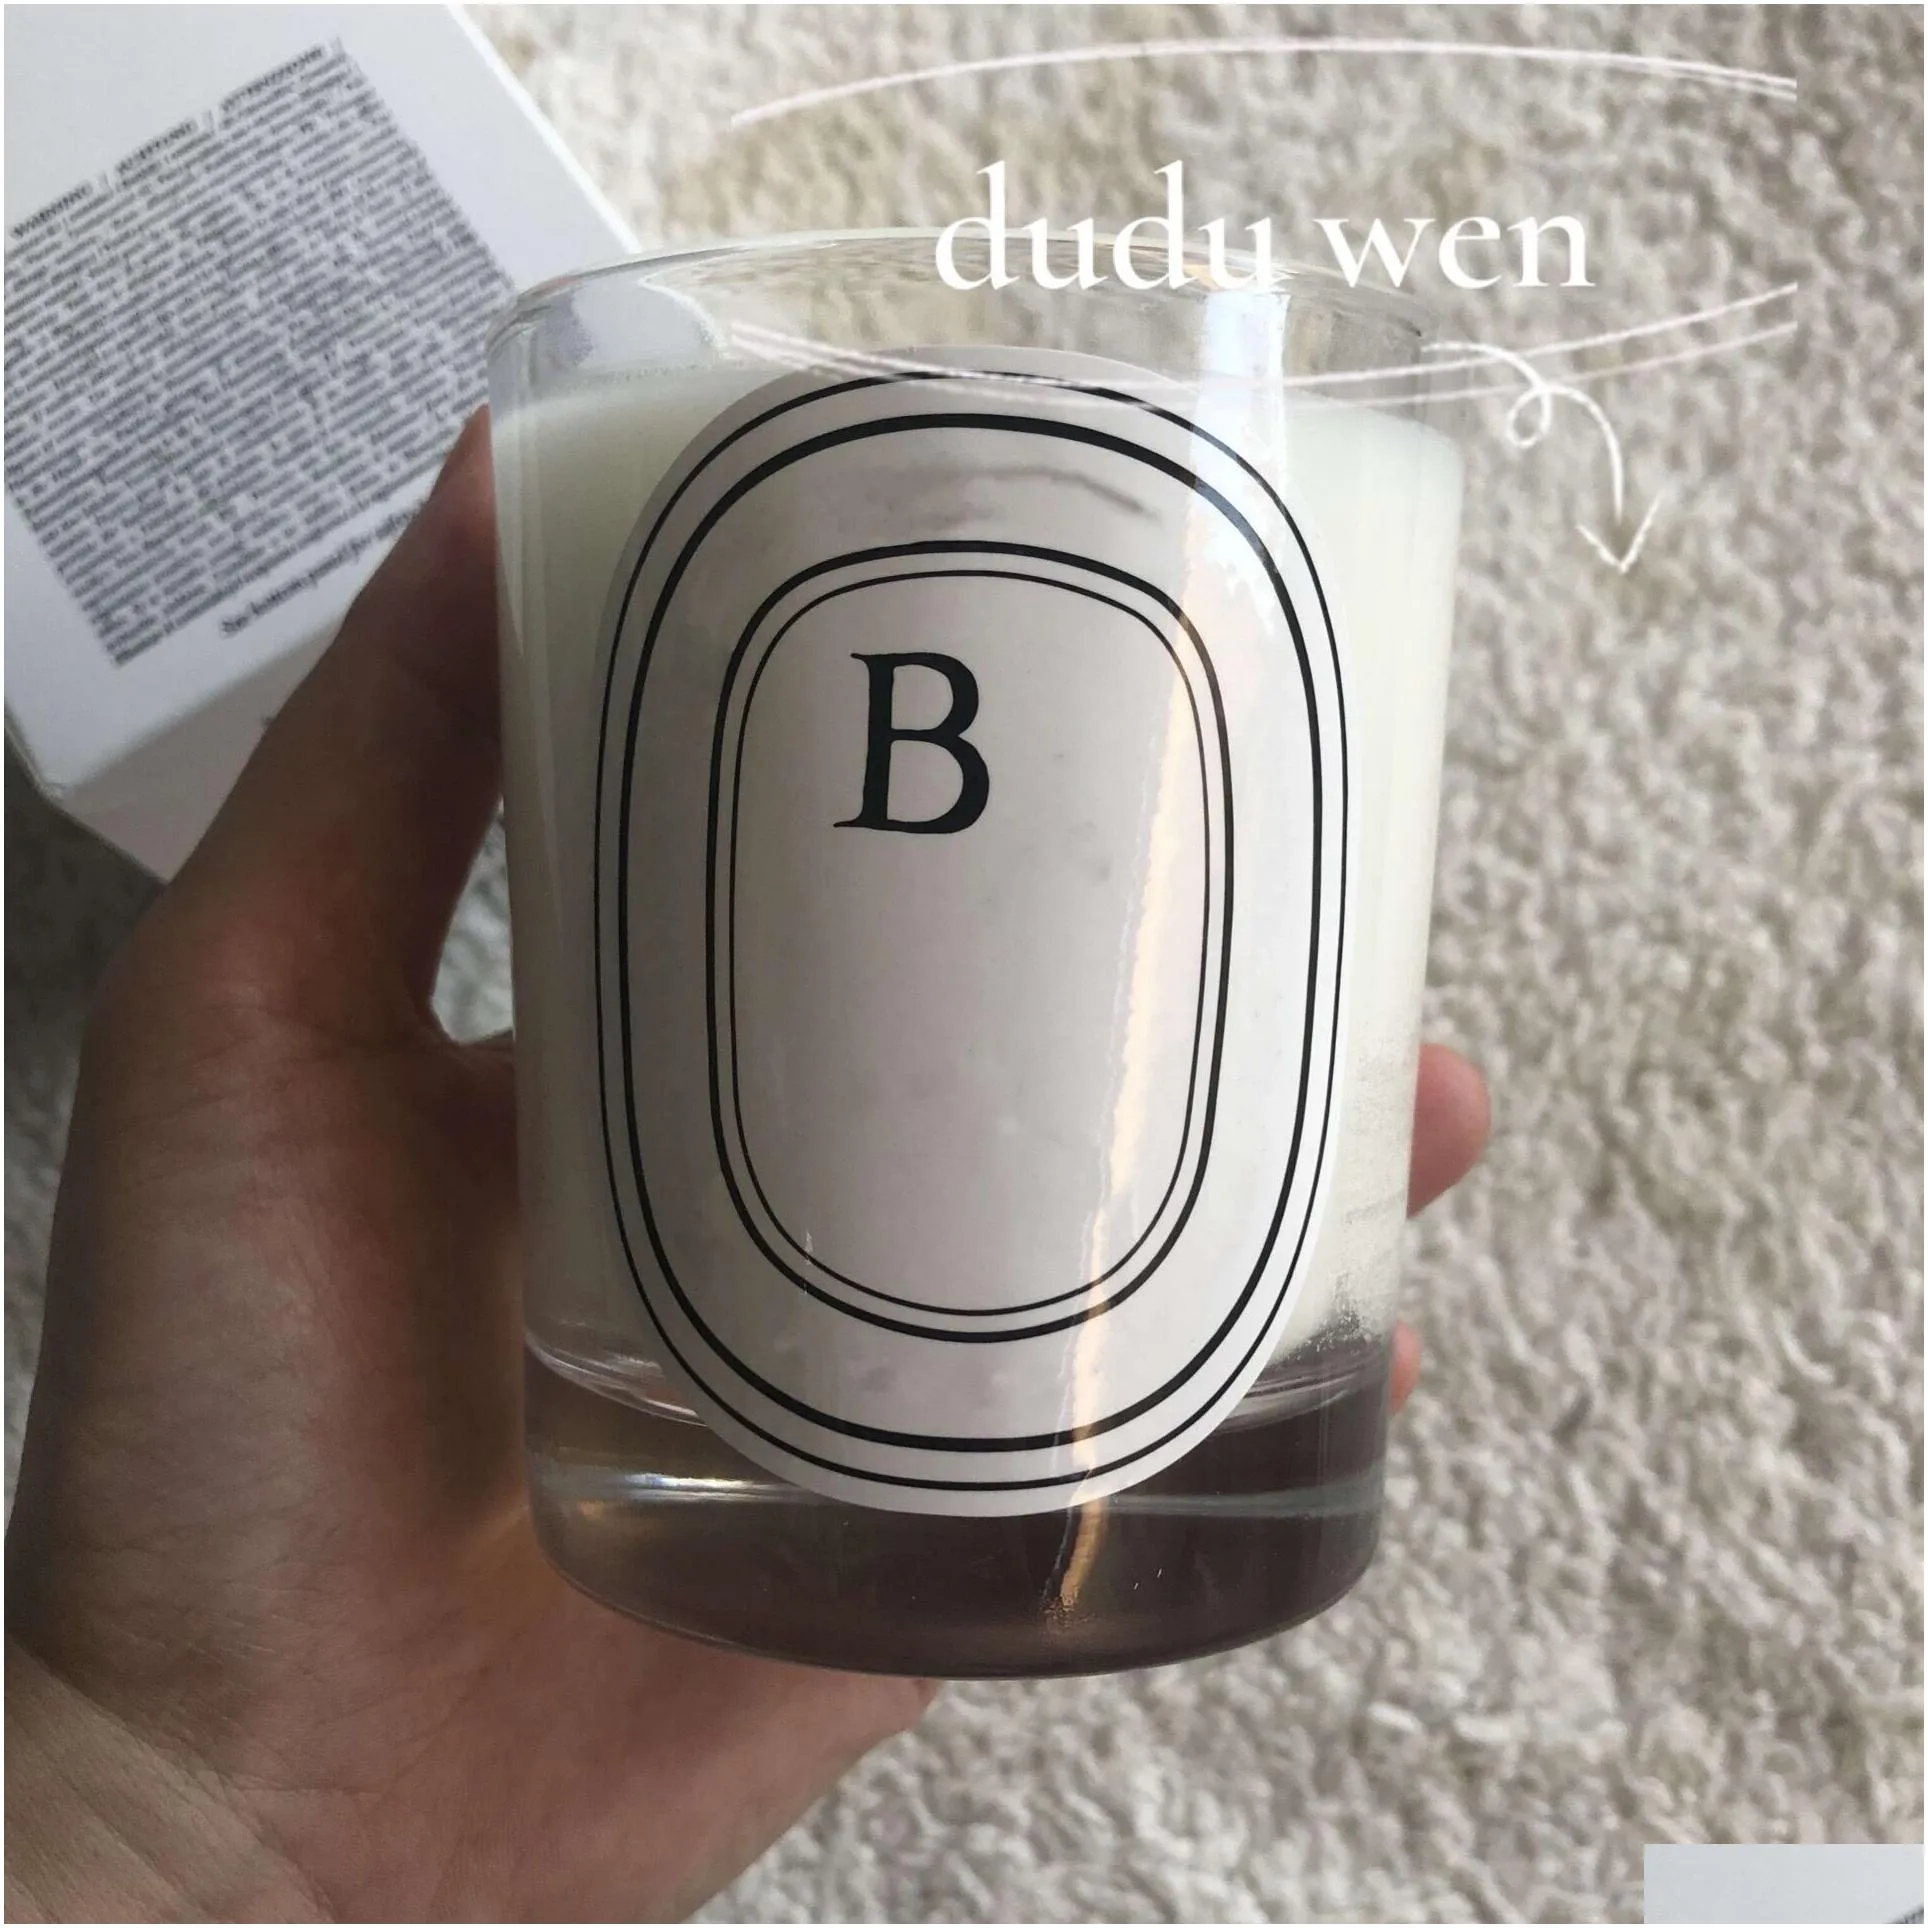 190g scented candle including box dip colllection bougie parfumee home decoration collection item